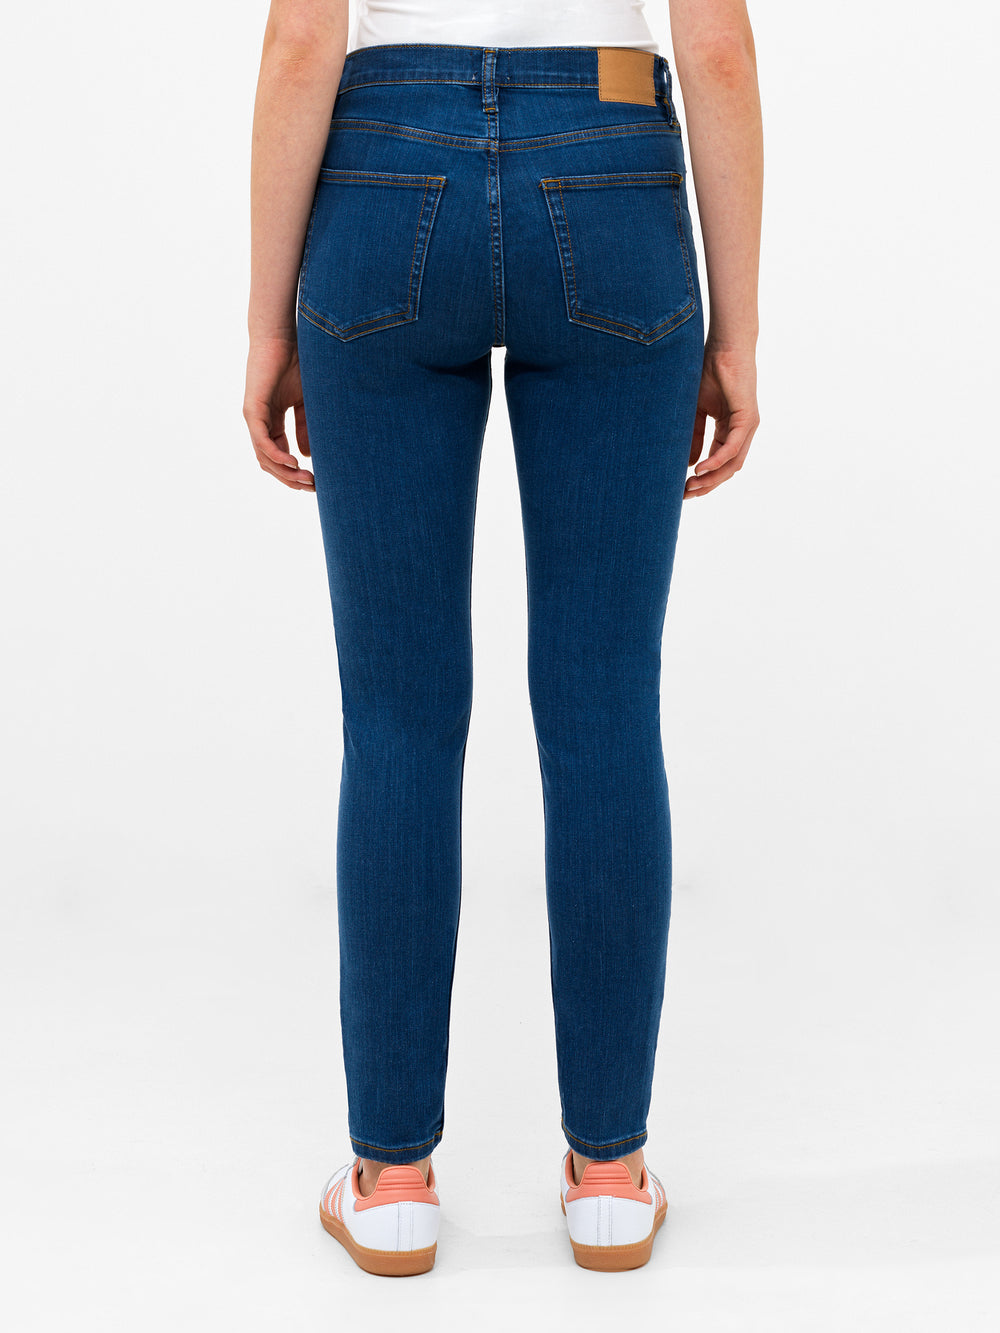 Rebound Response Skinny Jeans 30 Inch Mid Wash | French Connection UK